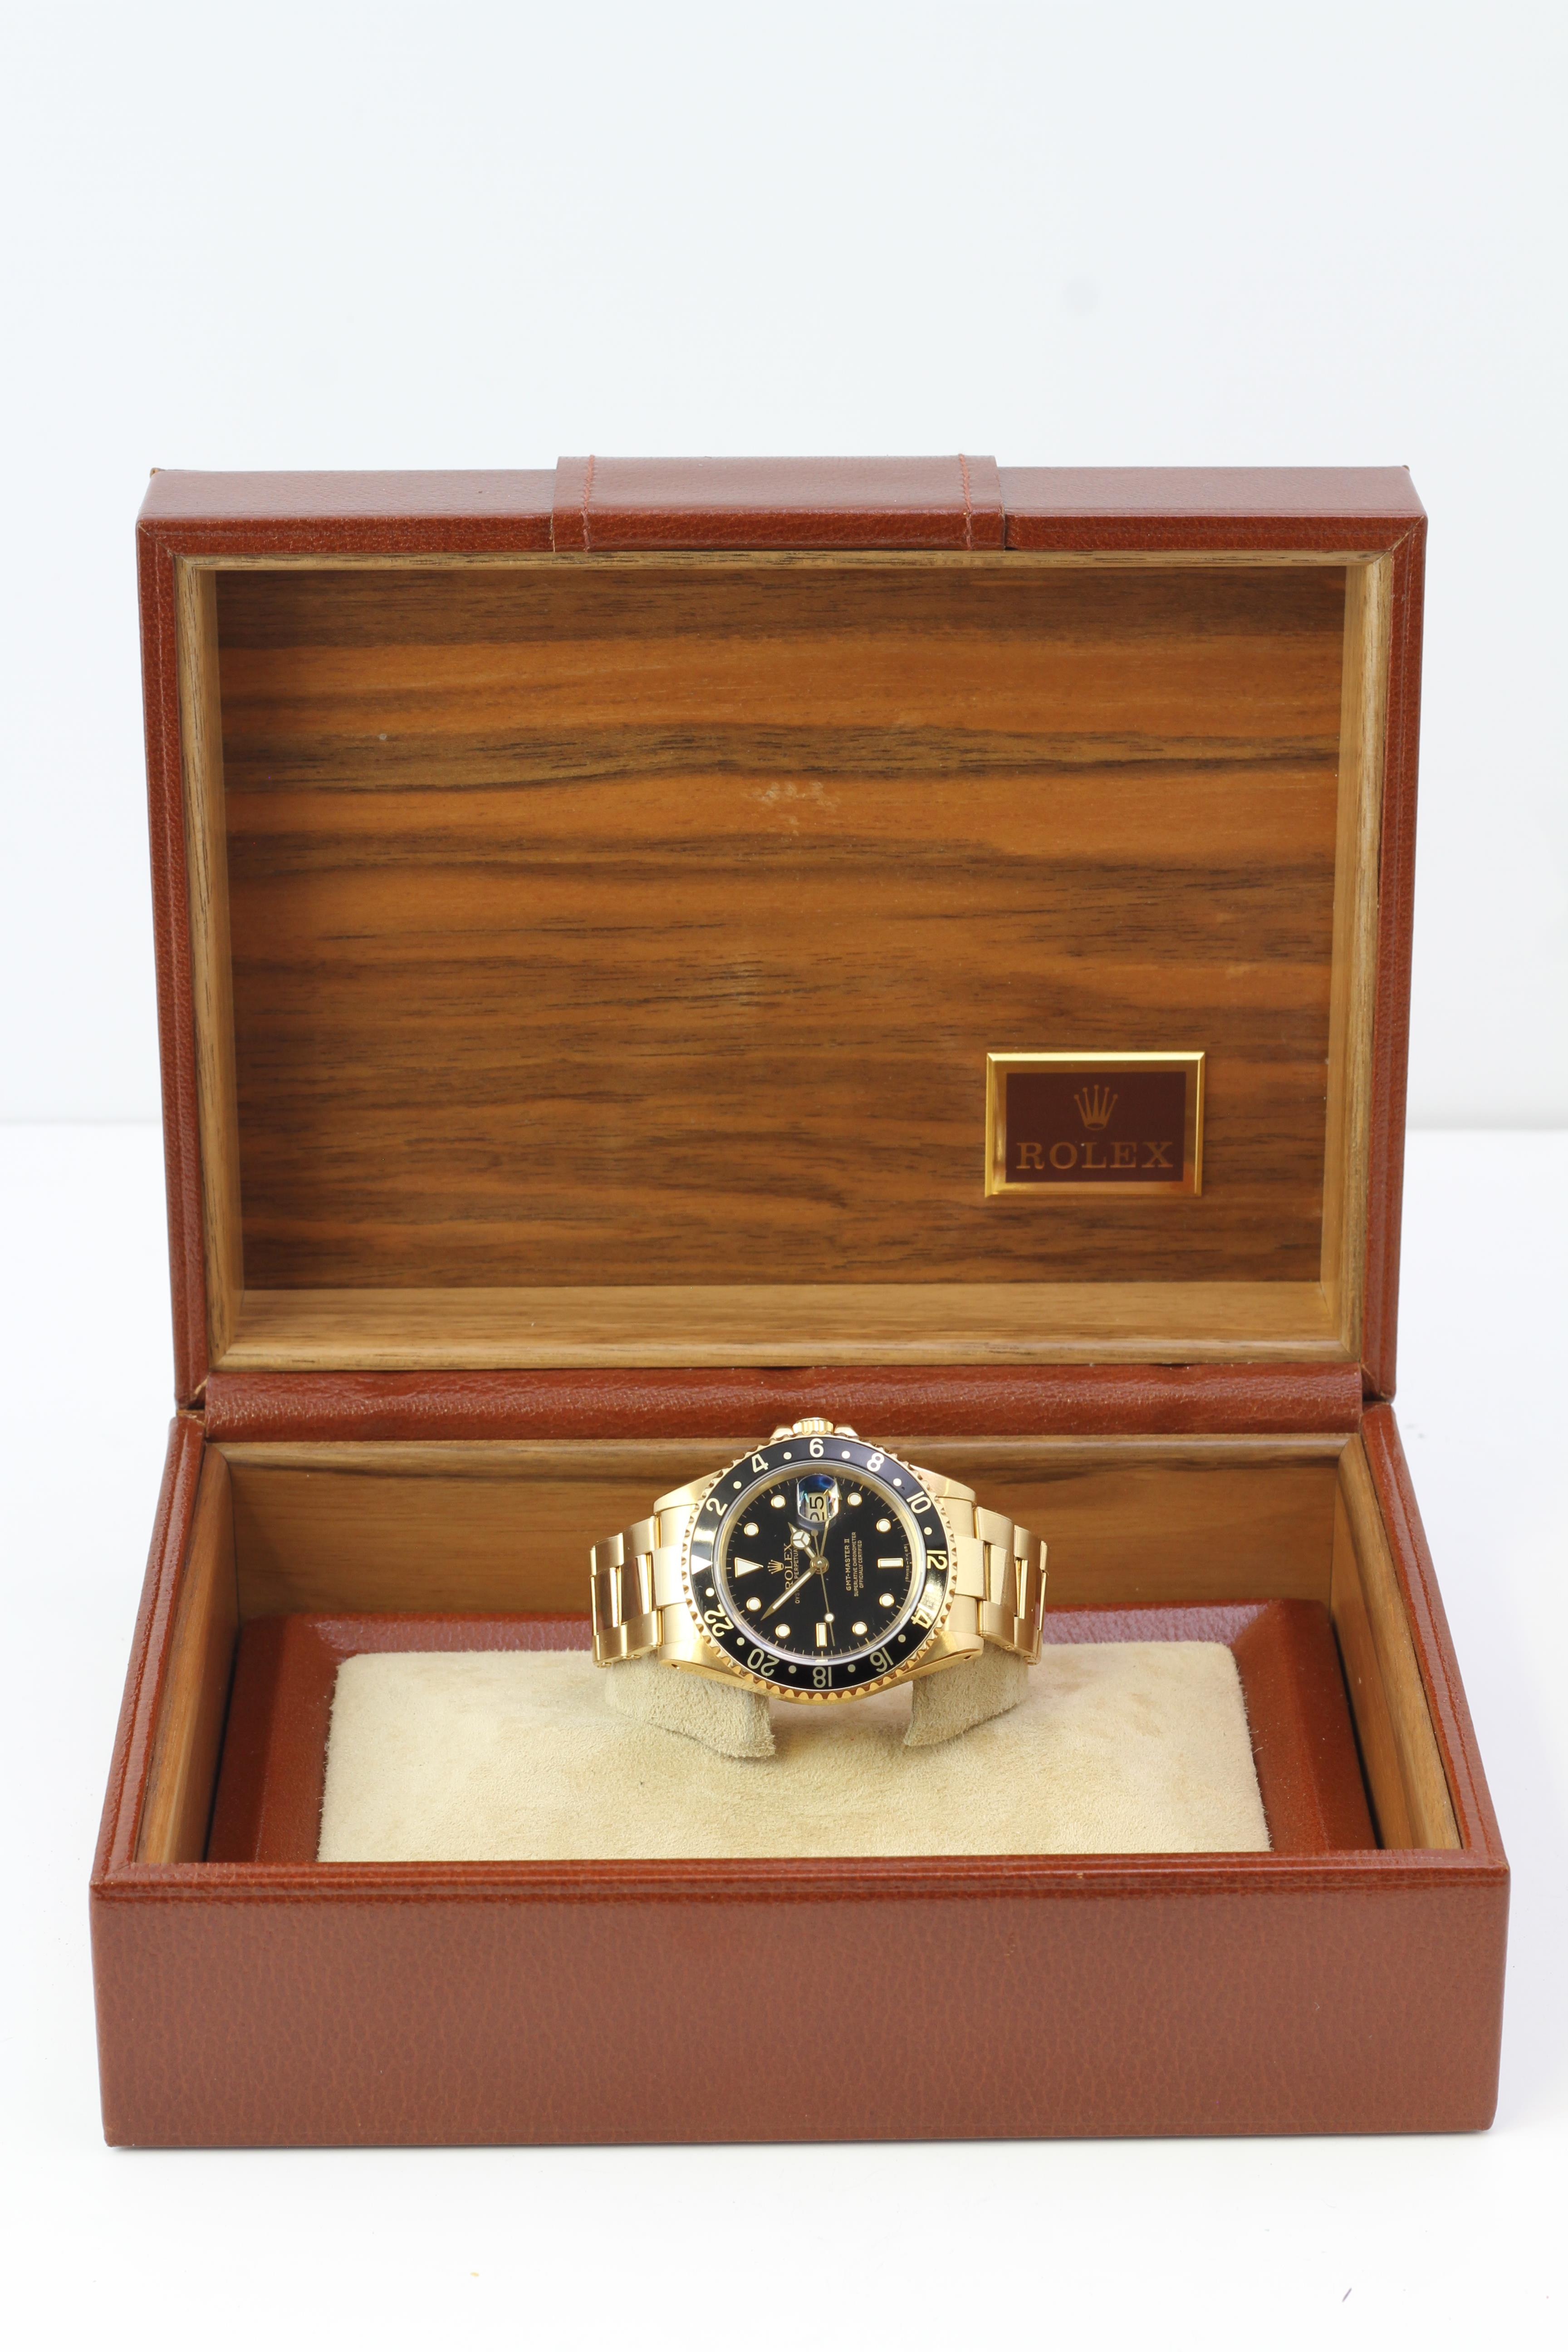 18CT ROLEX GMT MASTER 16718 WITH BOX RECENTLY SERVICED CIRCA 1991 - Image 2 of 14